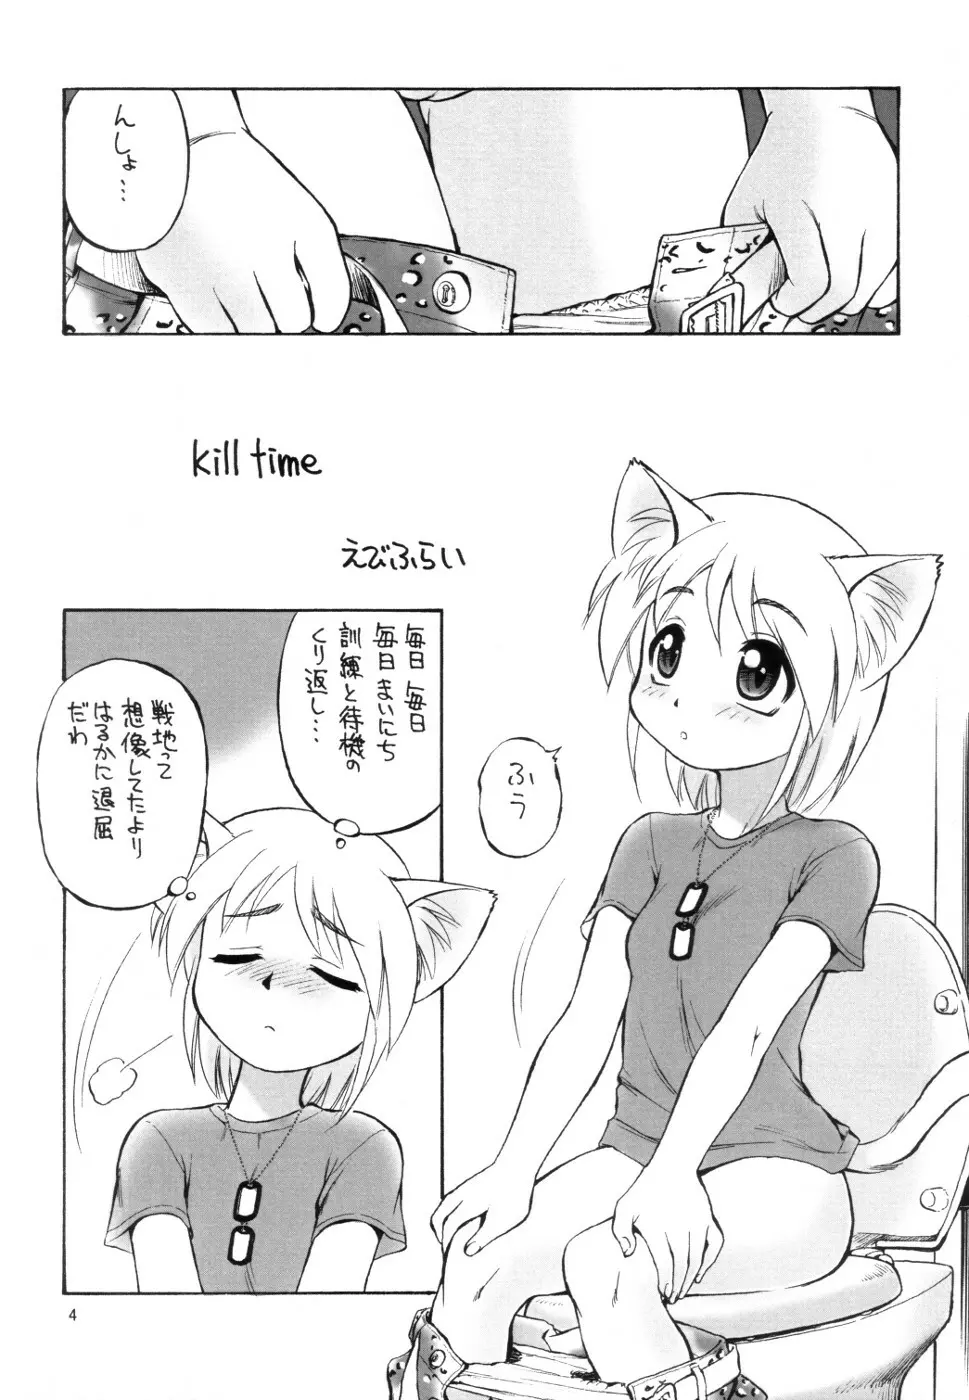 kill time Page.3